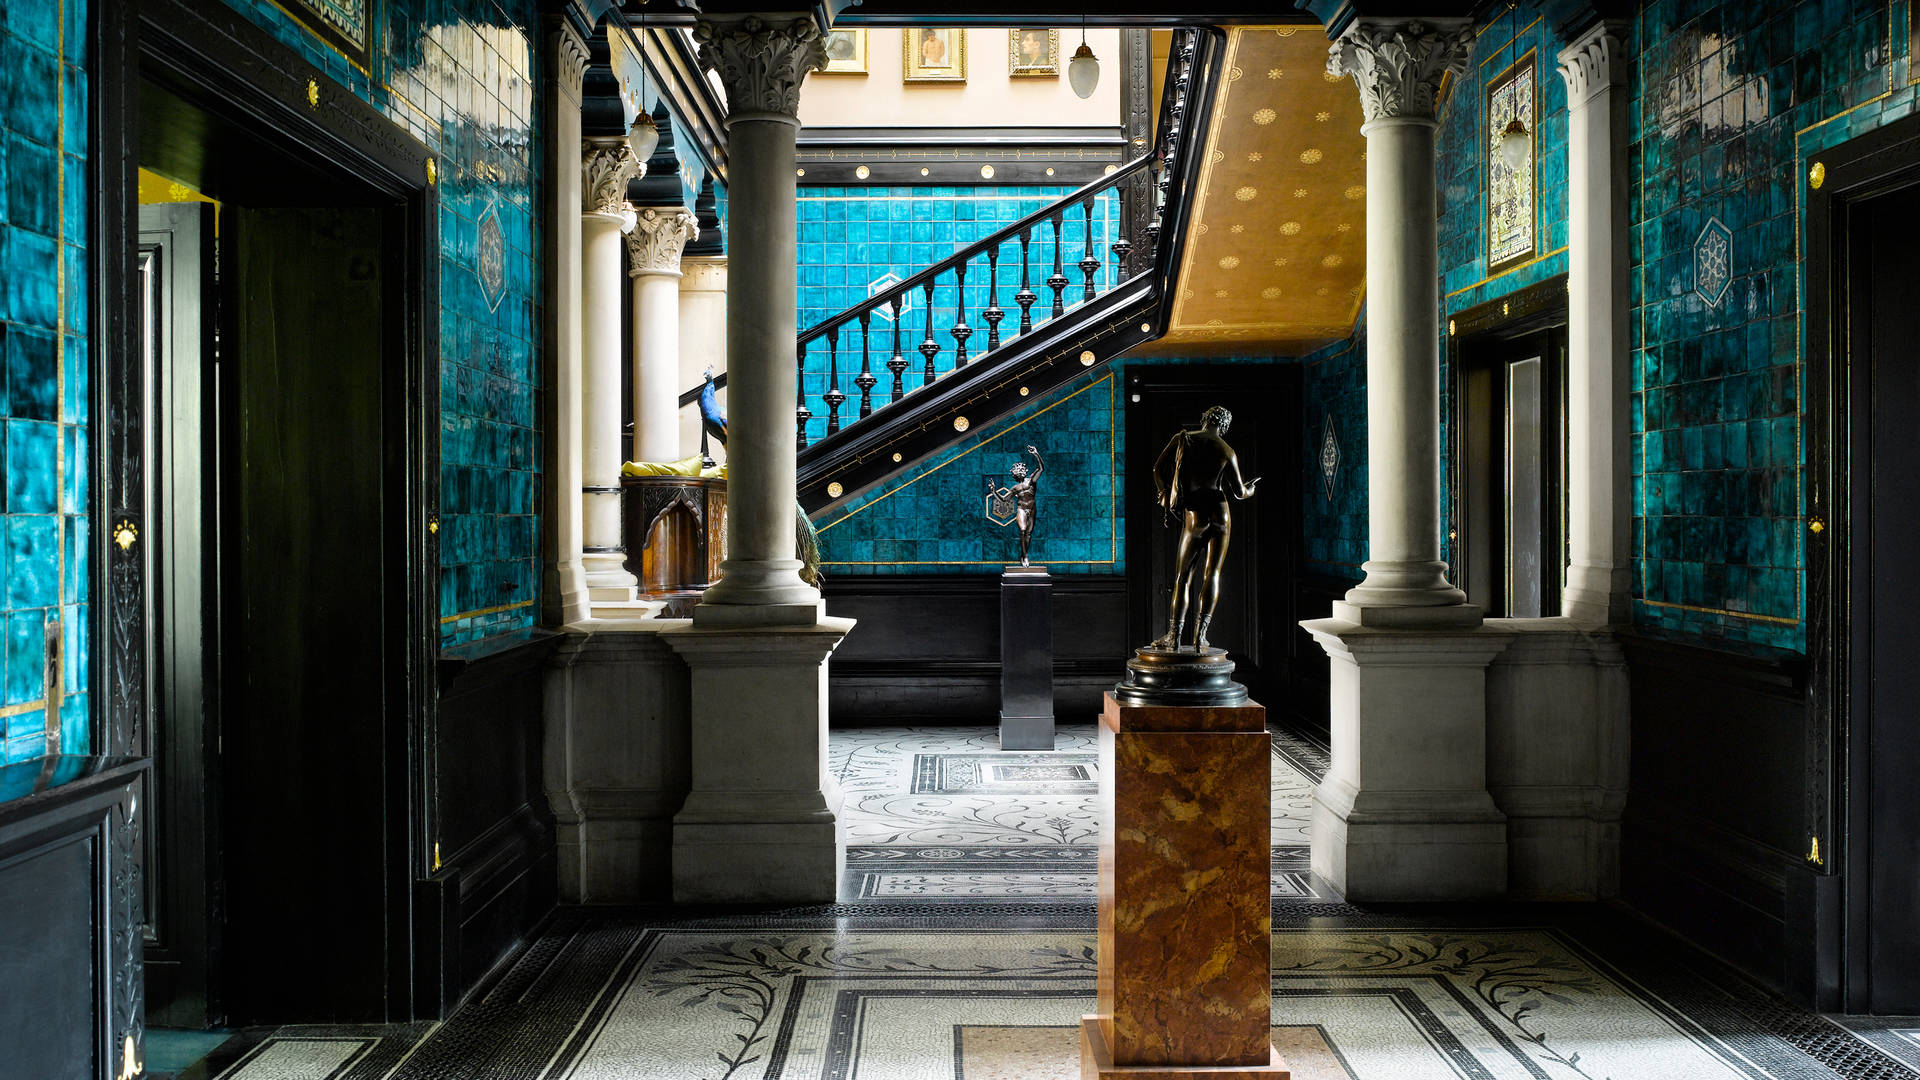 Narcissus Hall at the Leighton House Museum London Jumeirah